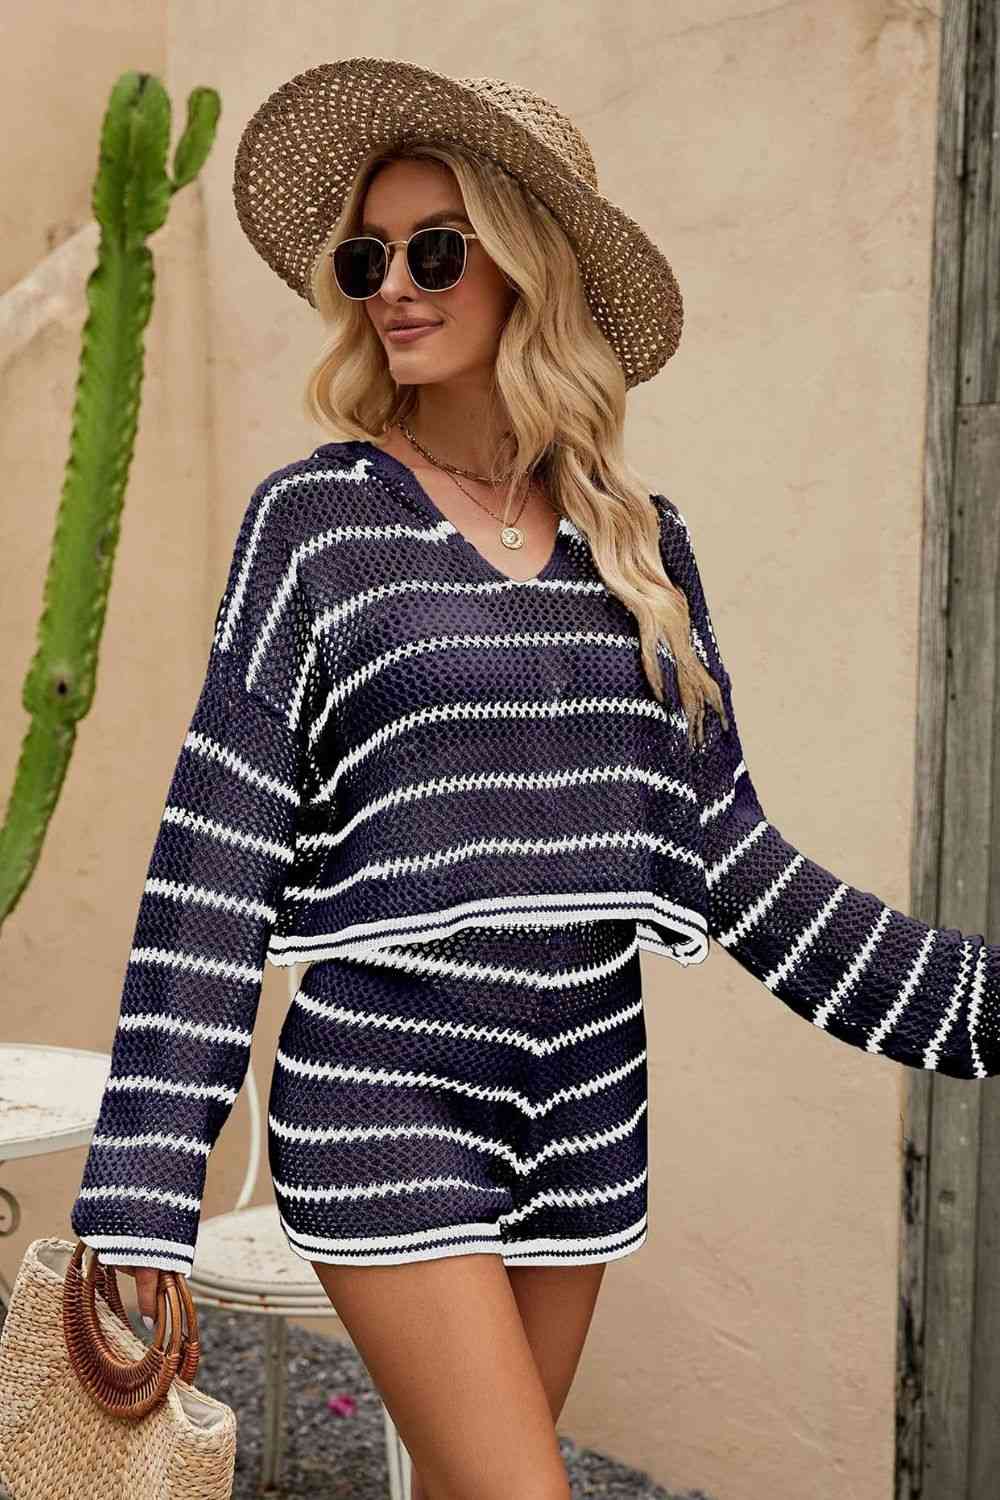 Striped Openwork Knit Hoodie and Shorts Set in Size S, M, L, or XL